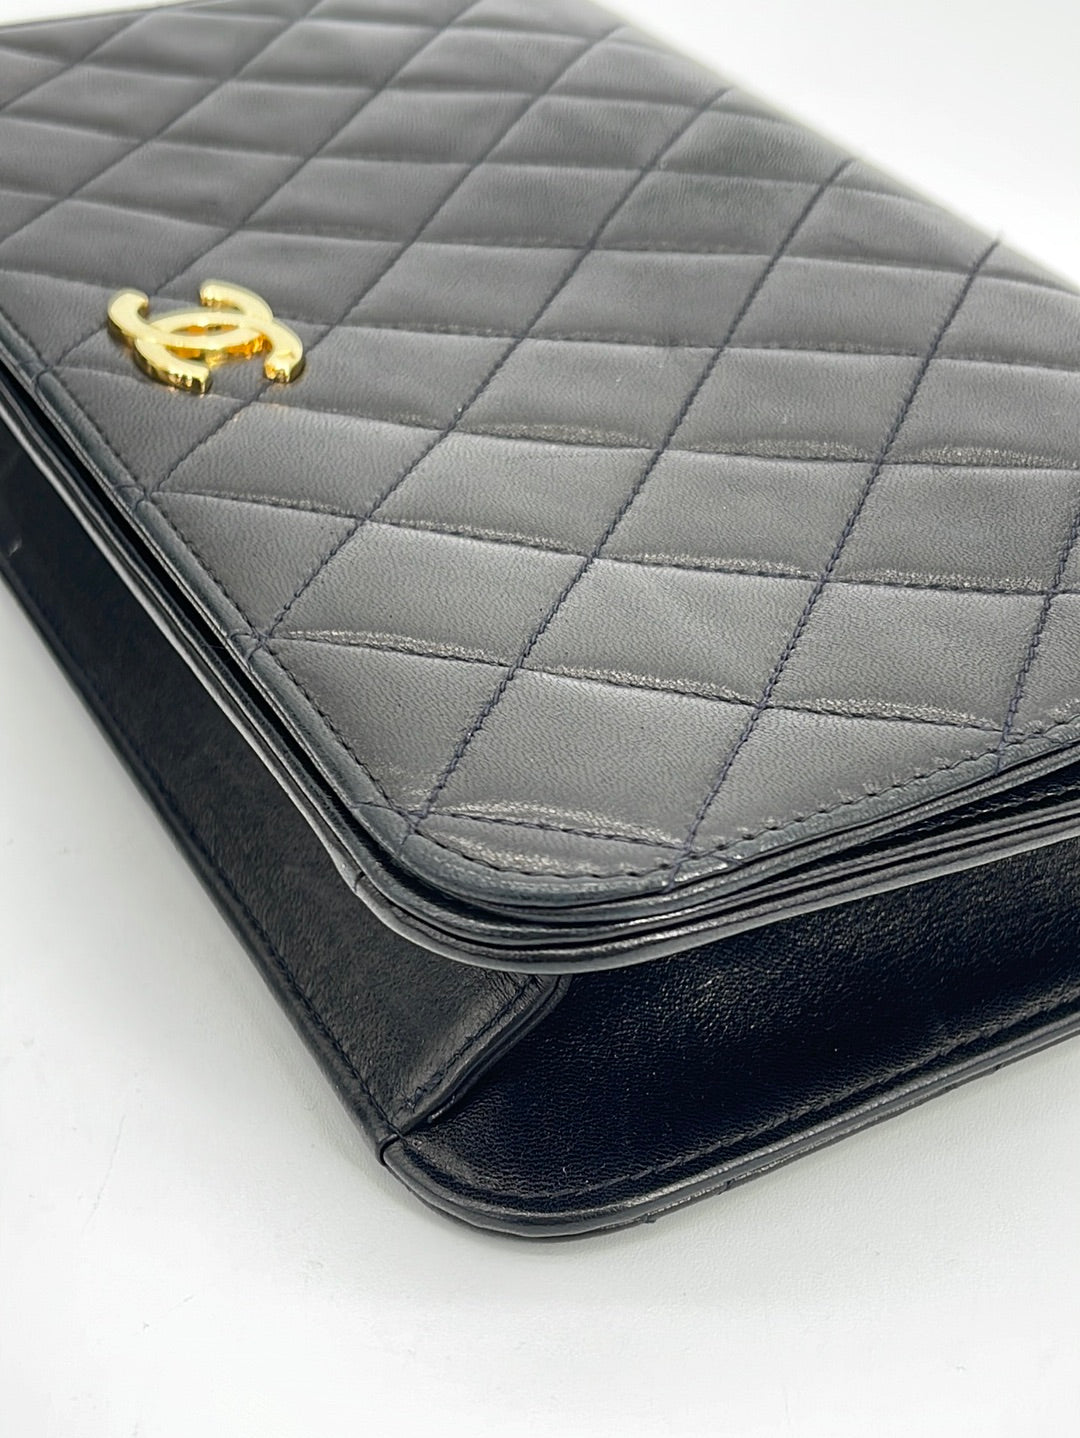 GIFTABLE Vintage Chanel Black Quilted Lambskin Full Single Flap Should –  KimmieBBags LLC